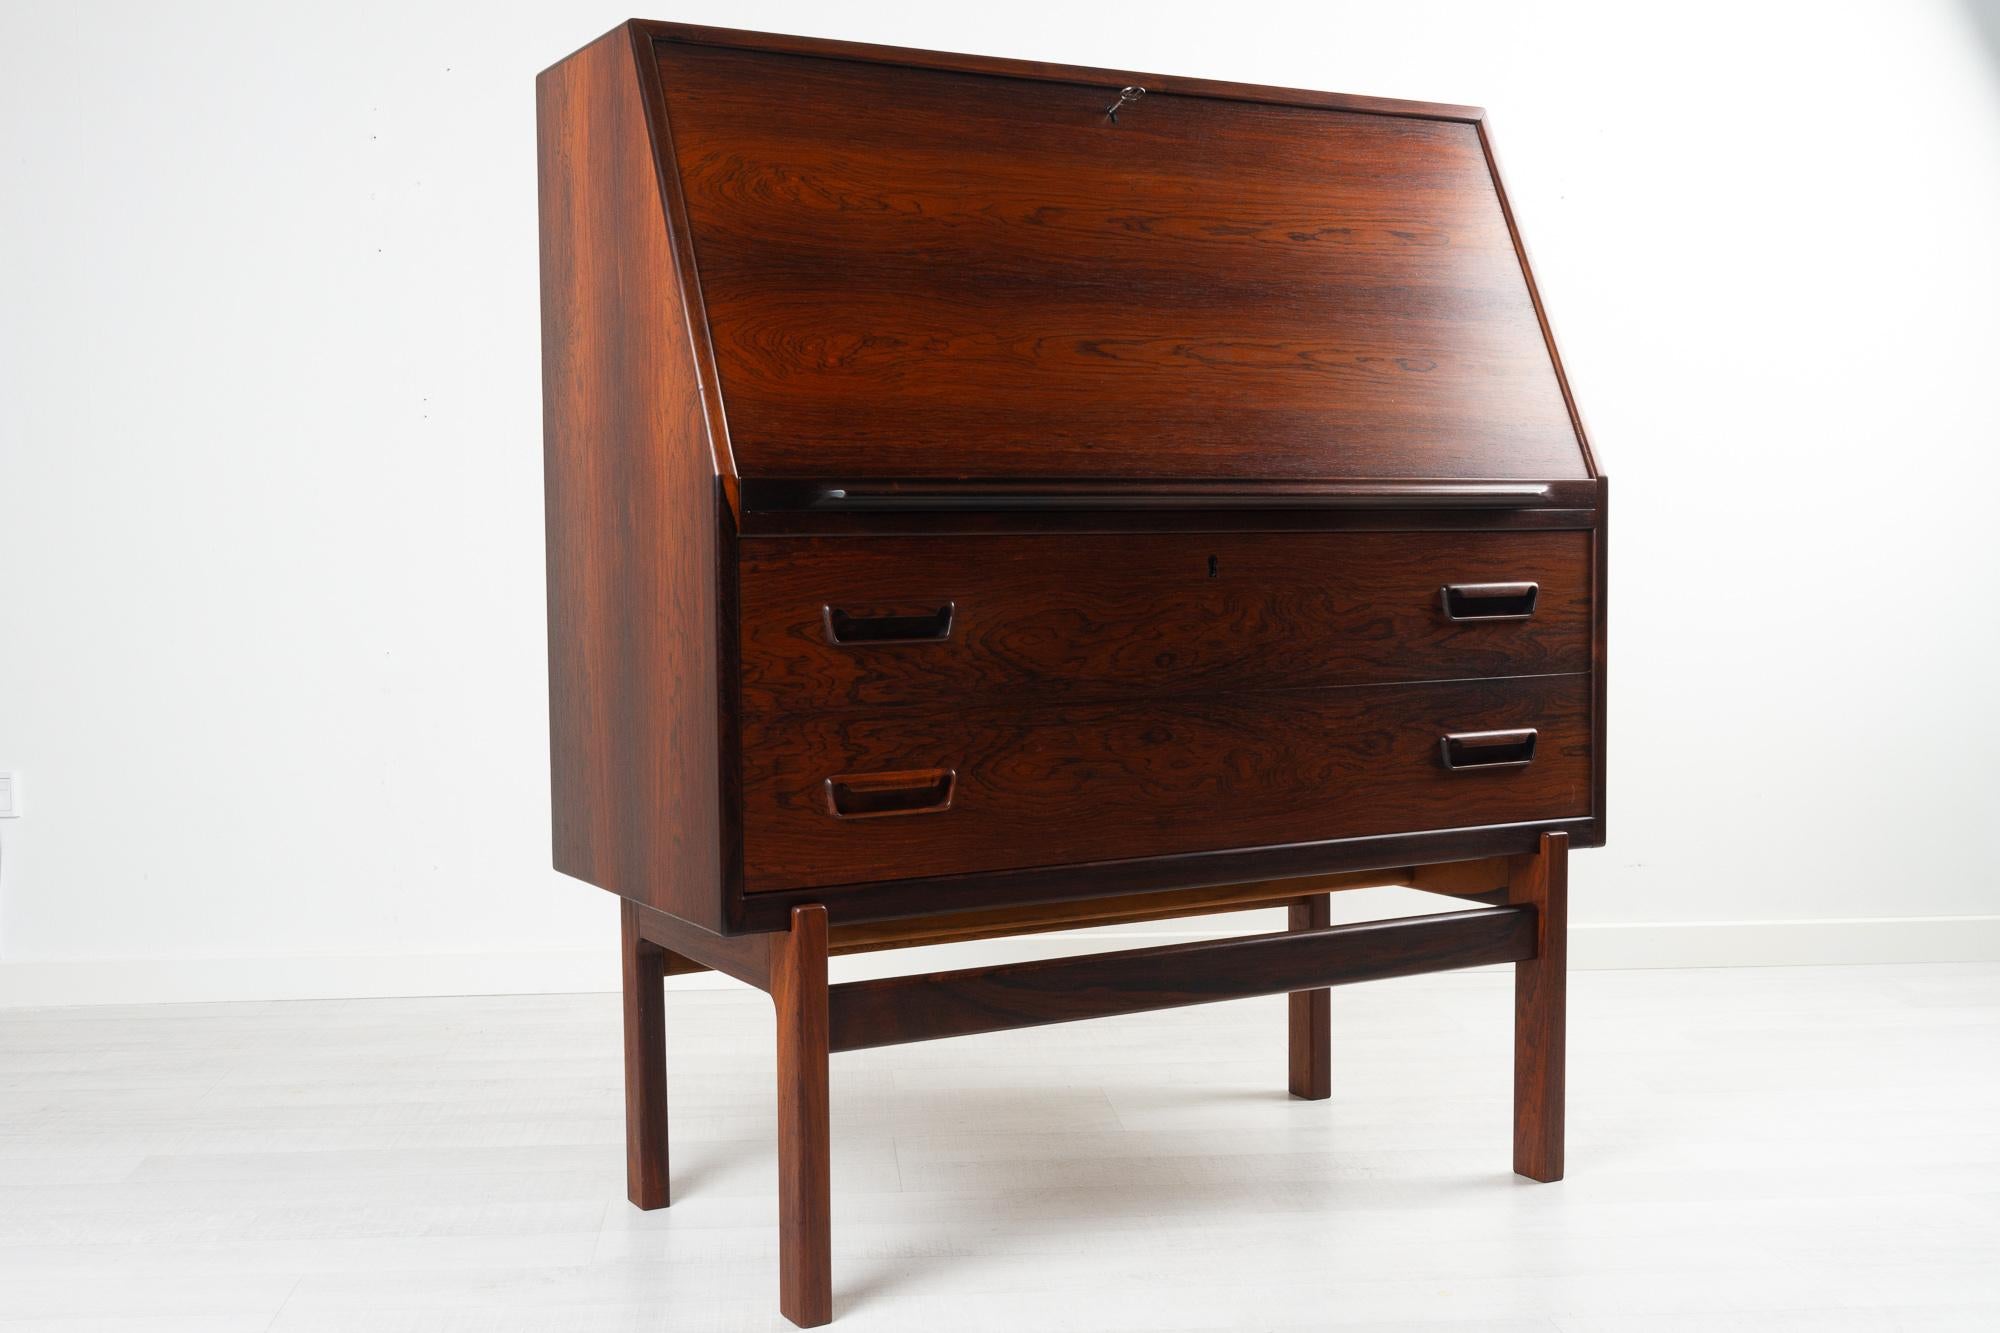 Danish modern rosewood secretary desk by Arne Wahl Iversen 1960s

Beautiful rosewood secretaire model No. 68 designed by Danish architect Arne Wahl Iversen and manufactured by Vinde Møbelfabrik, Denmark in the 1960s.

Drop down front doubles as